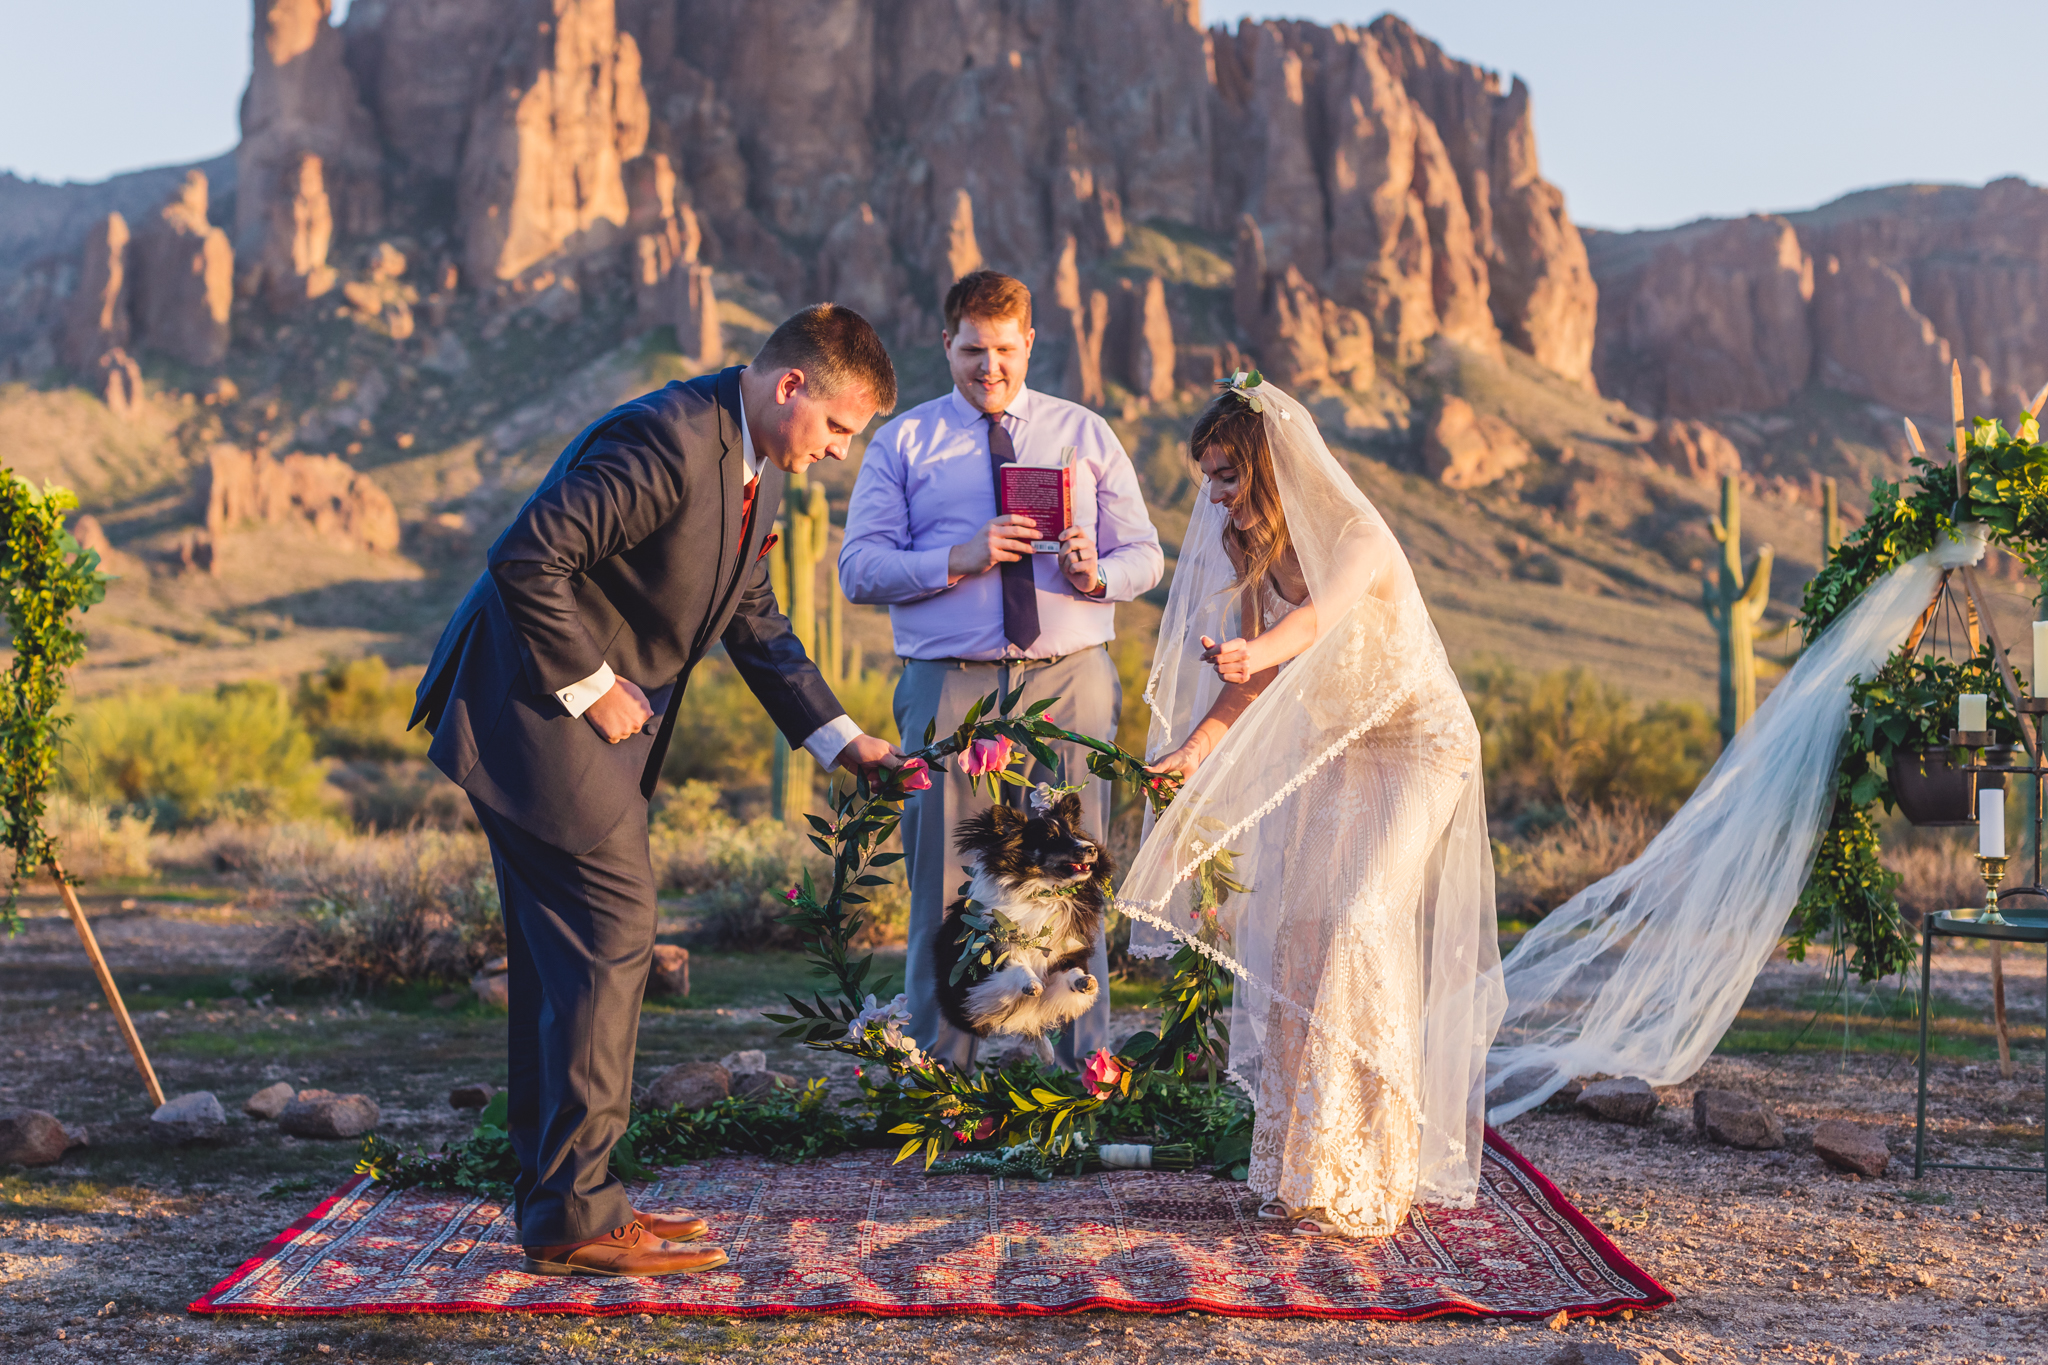 Location: Superstition Mountains, Apache Junction, AZI had to end with a dog shot. If you have a dog at your wedding, I want to be there. We had our dog as our ring bearer like these two. But they kicked it up a notch by having him jump through a ri…